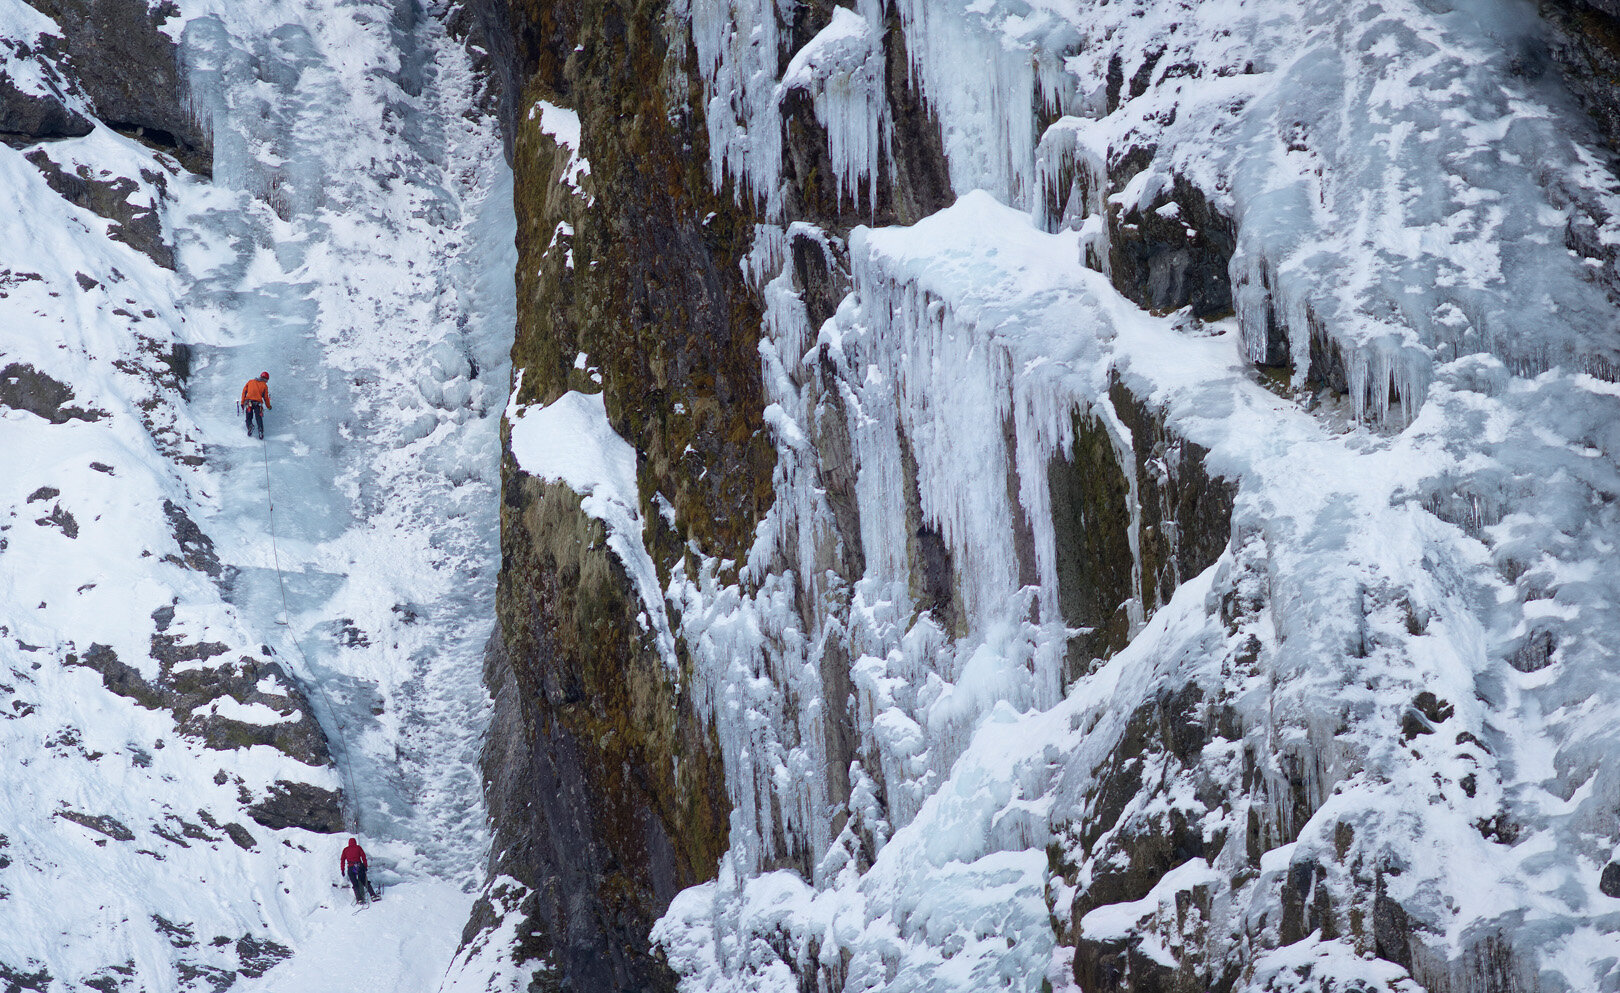 Ice climbing by the Milford Tunnel